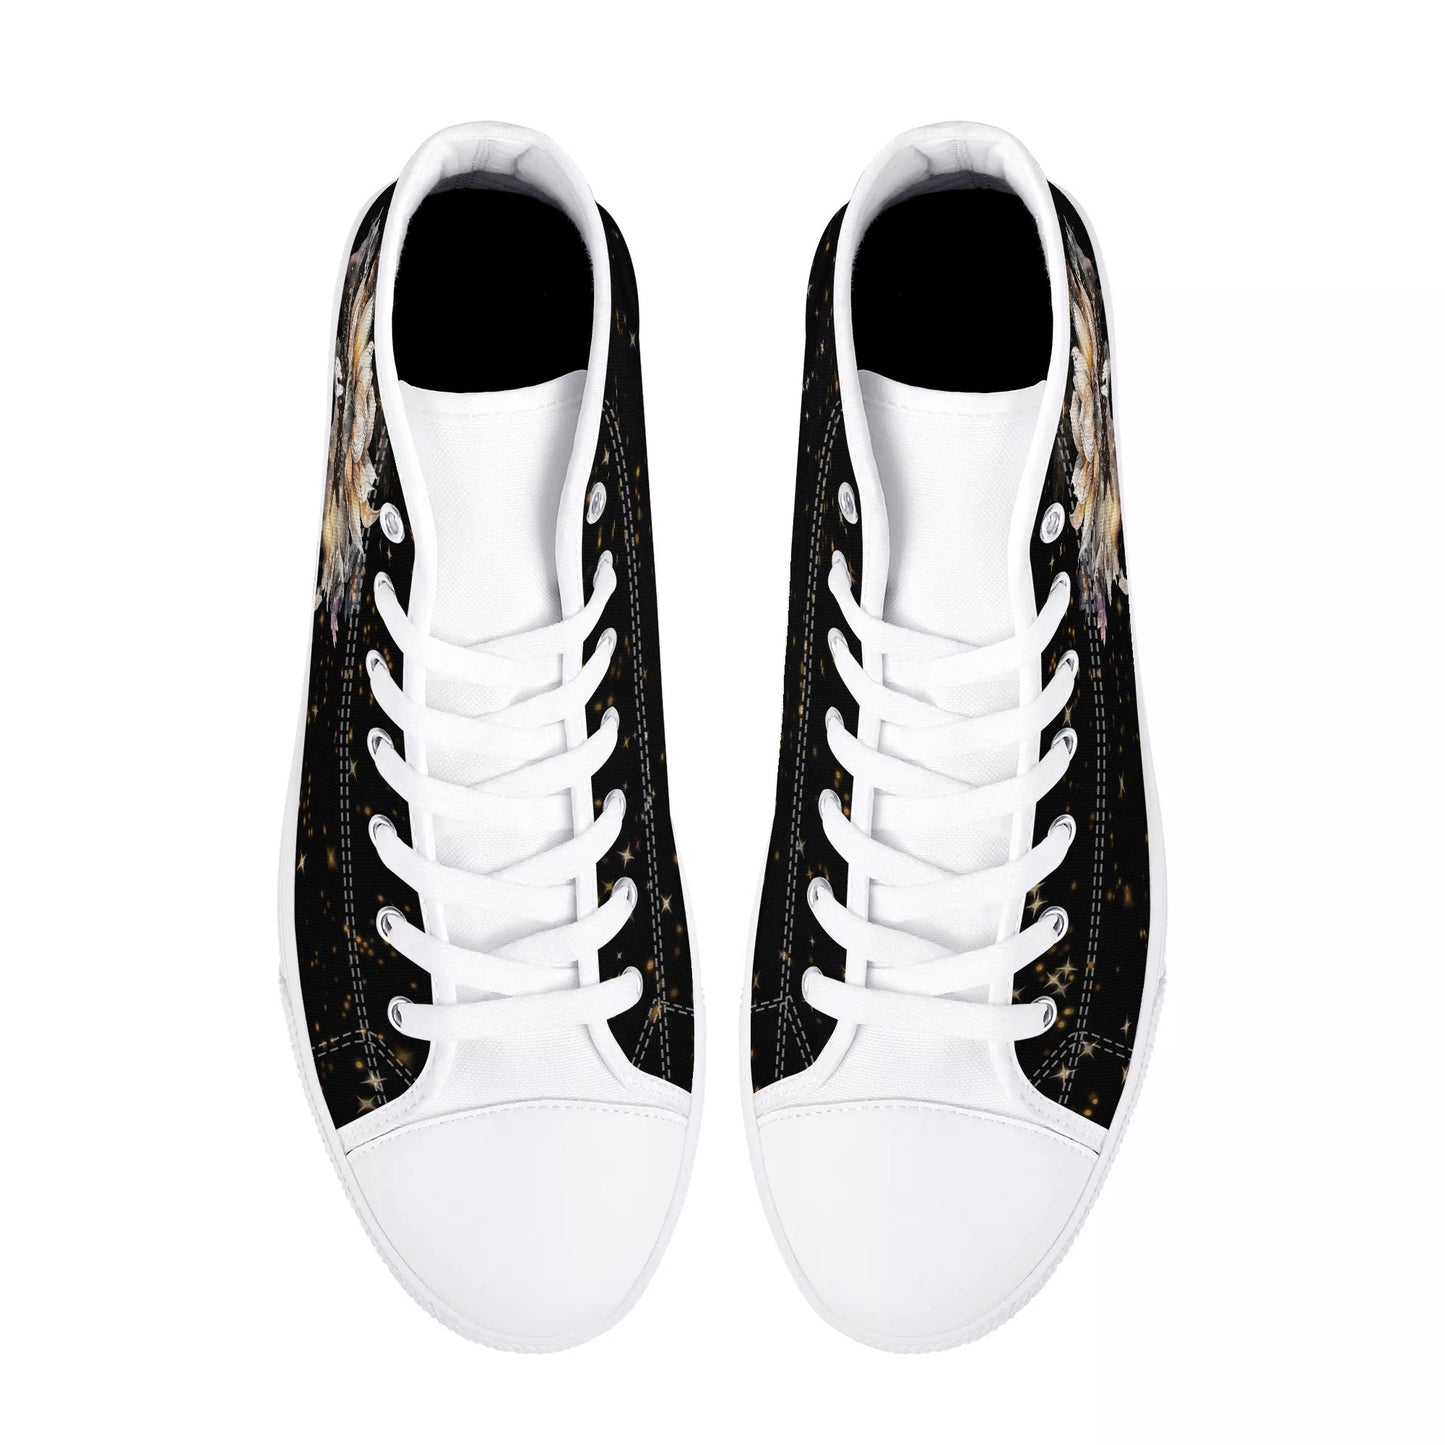 Lotus Moon Womens High Top Canvas Shoes